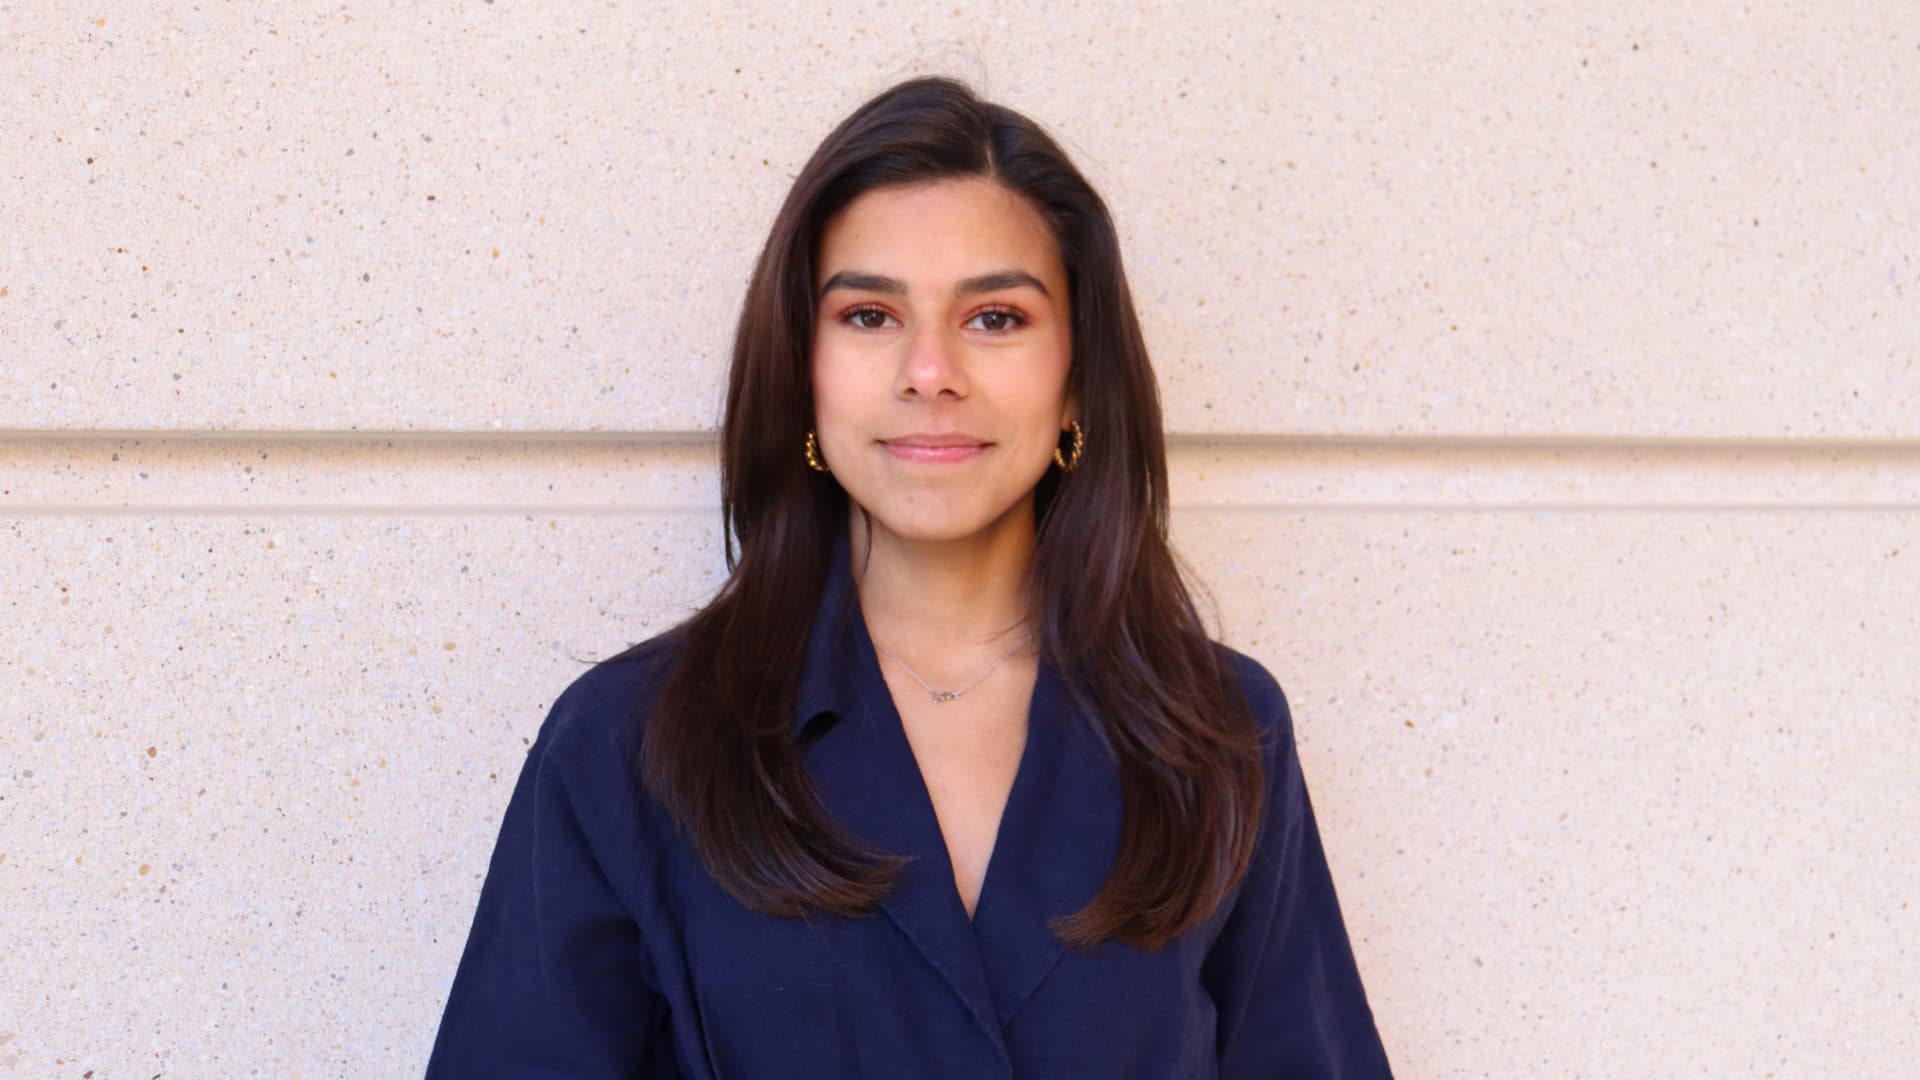 Montserrat Lewin Mejia, an engineering student at Michigan State University, has worked as a brand ambassador for Rent the Runway, Bumble and fashion start-up Qatch. Her new career goal is to become a full-time influencer.